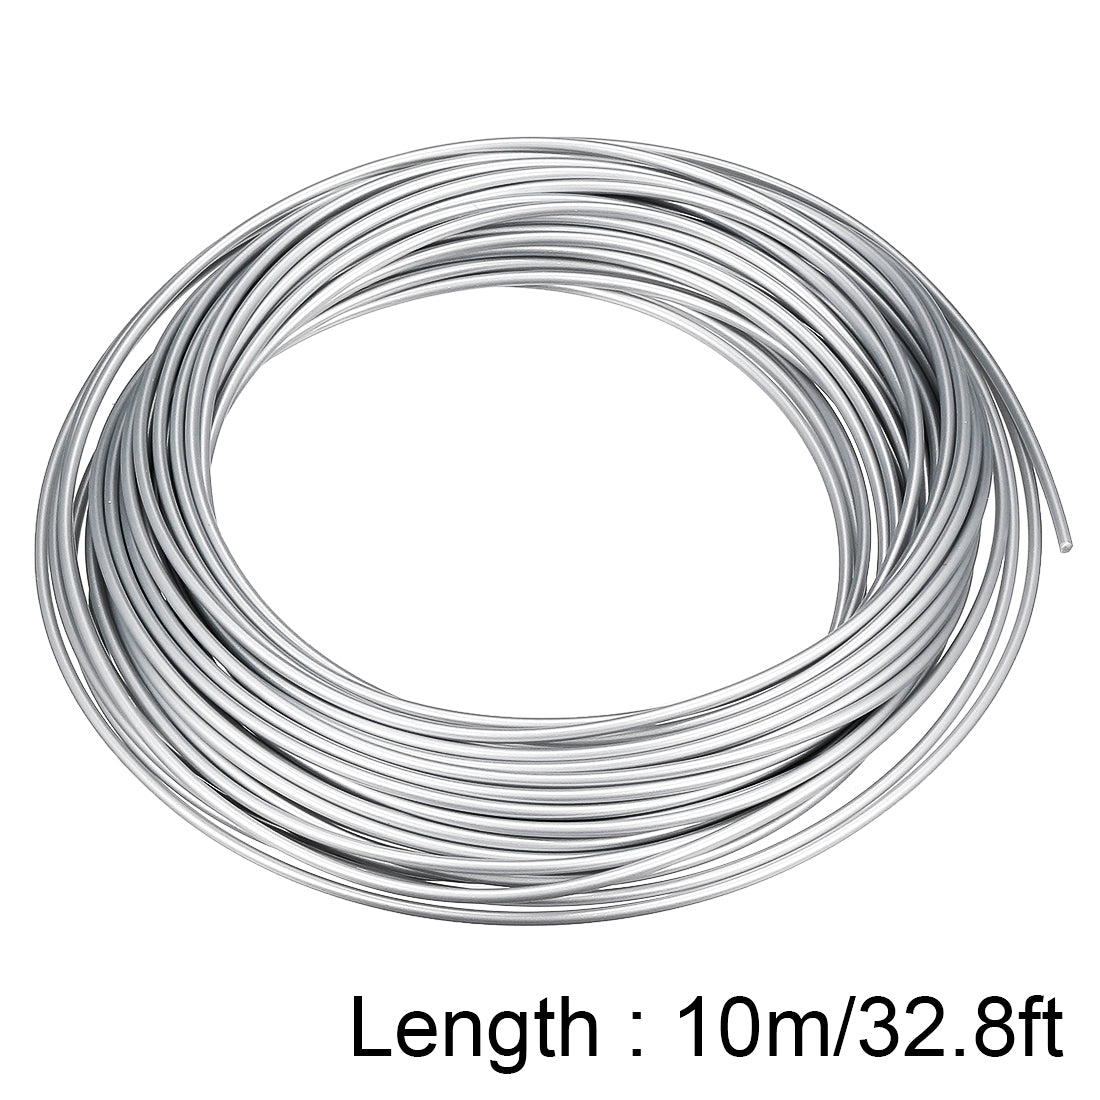 uxcell Uxcell 3D Printer Pen Filament Refills, 32.8Ft Length, 1.75 mm Dia, PLA, Dimensional Accuracy +/- 0.02mm, for 3D Painting and Drawing, Silver Tone